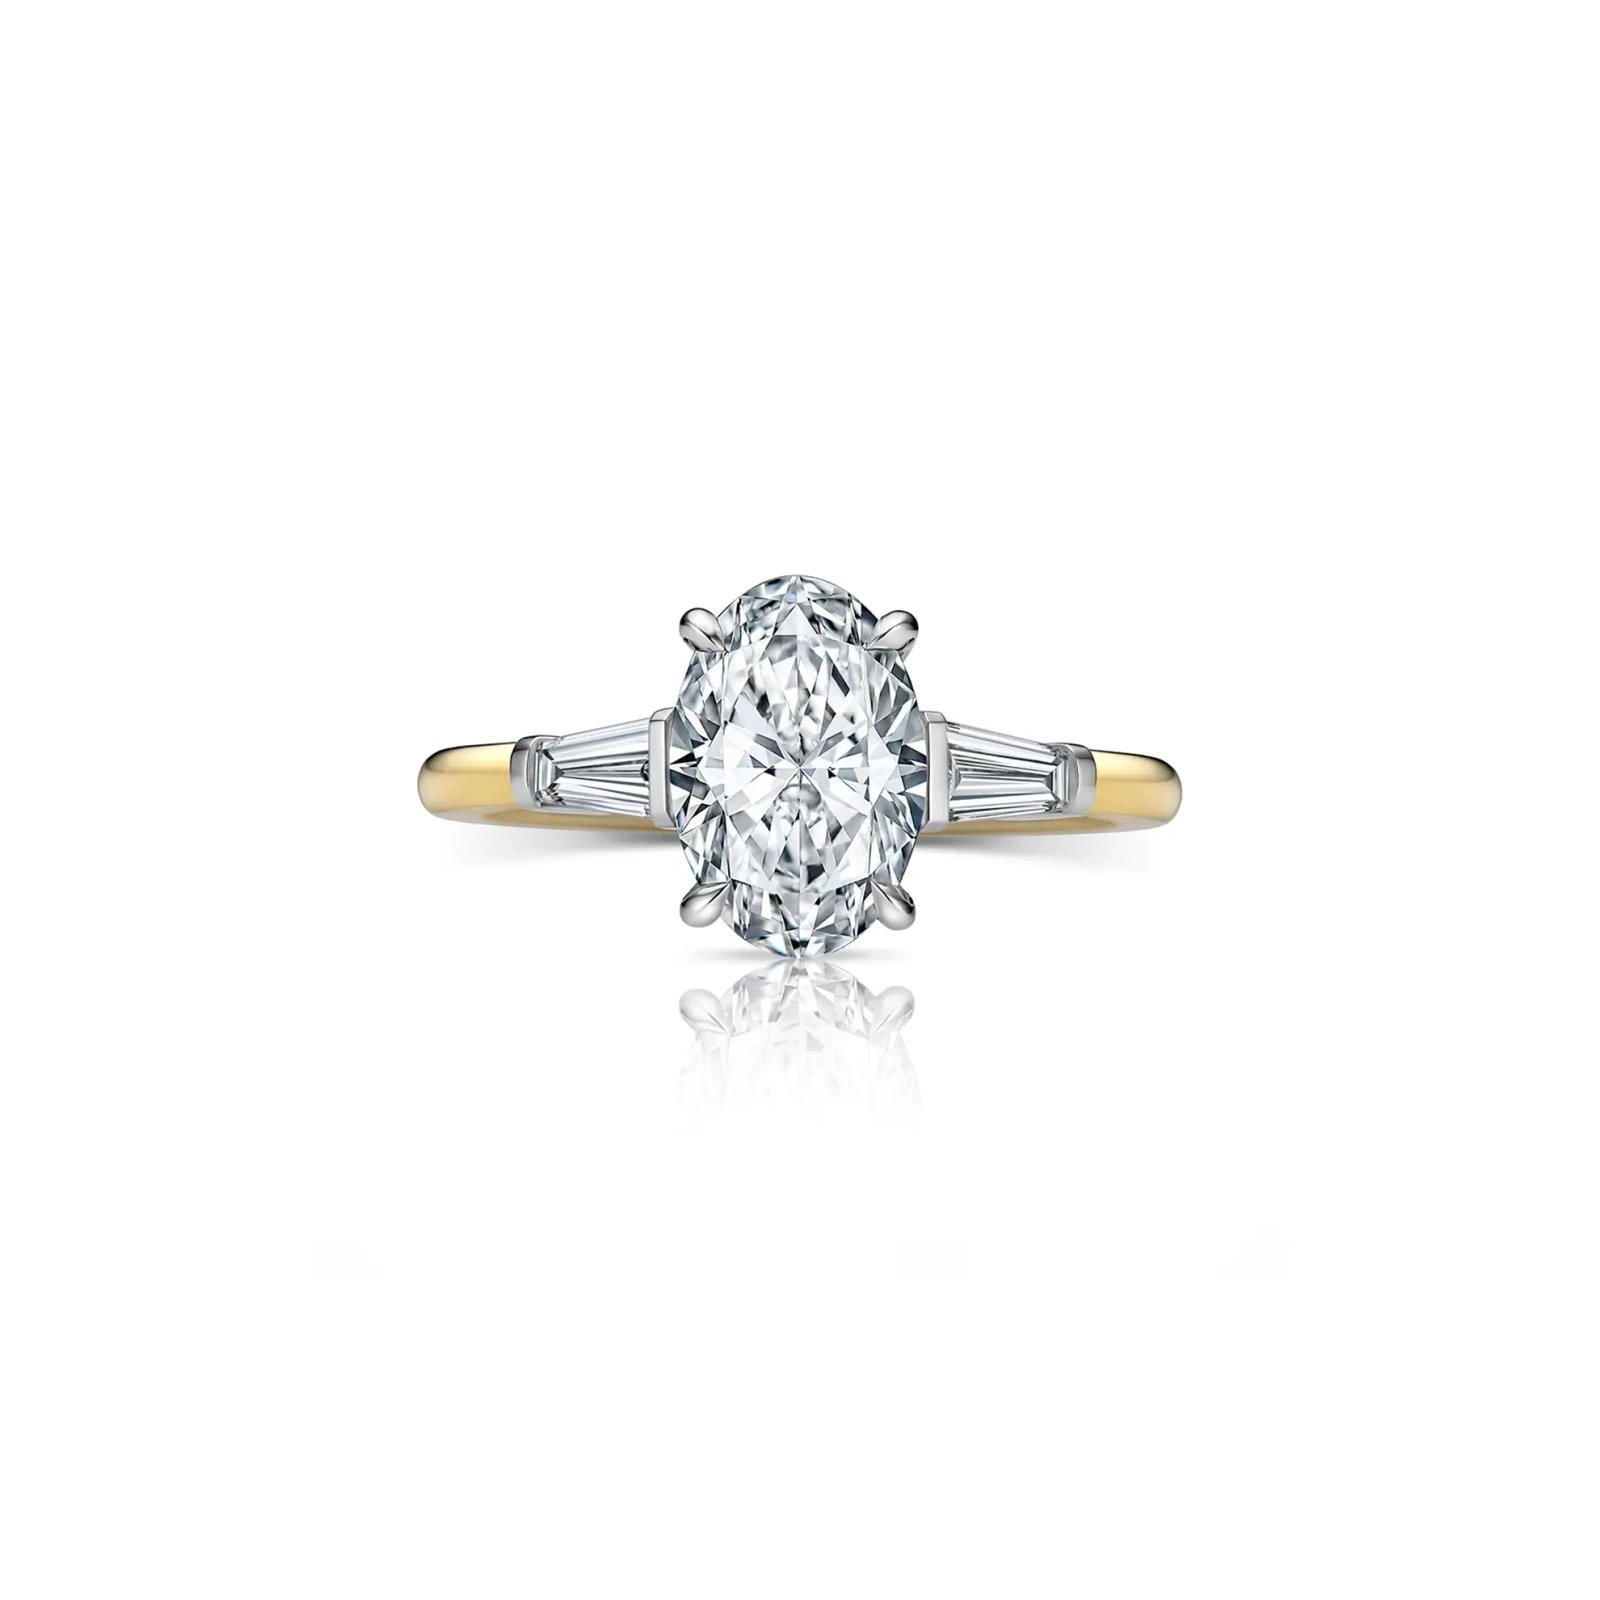 Oval Diamond Engagement Ring with Tapered Diamond Side Stones